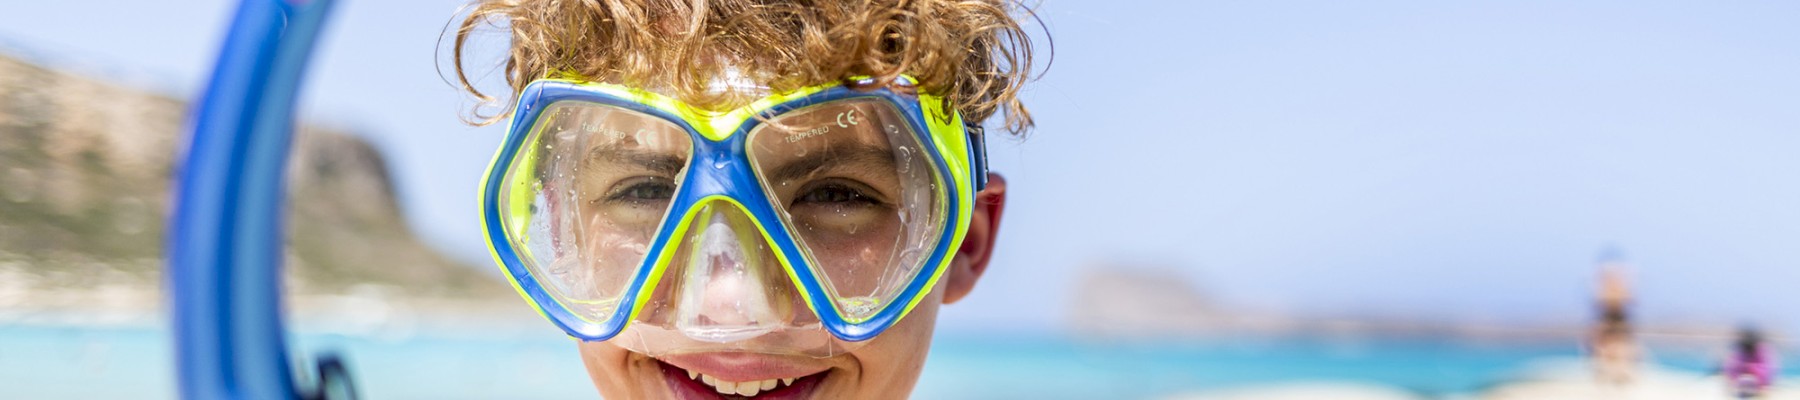 A child with curly hair is wearing a snorkel mask and holding a snorkel at the beach.